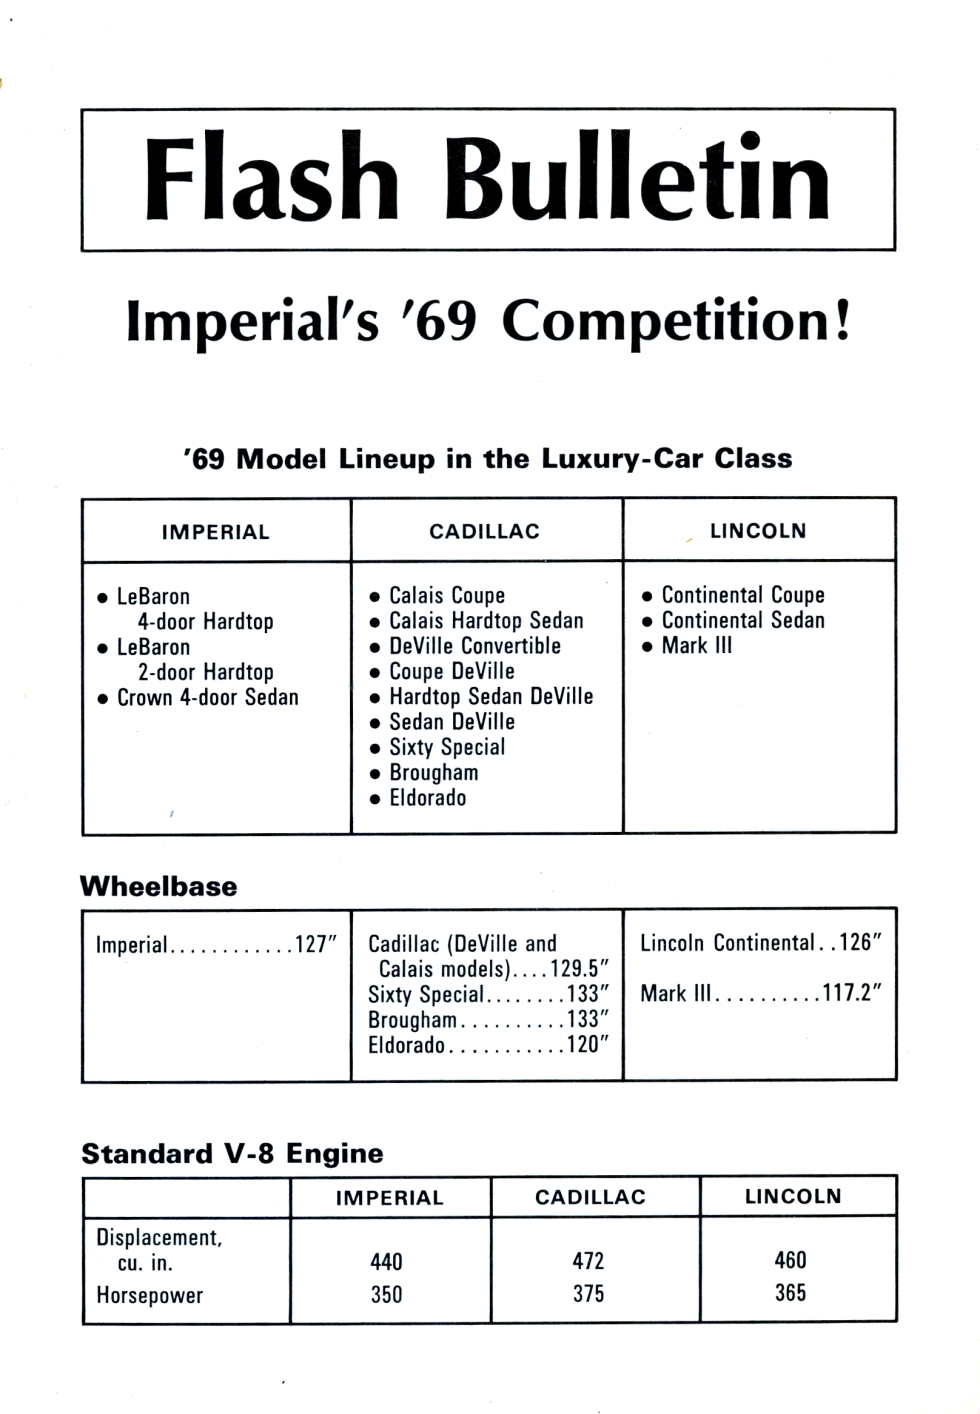 1969 Chrysler Imperials Competition